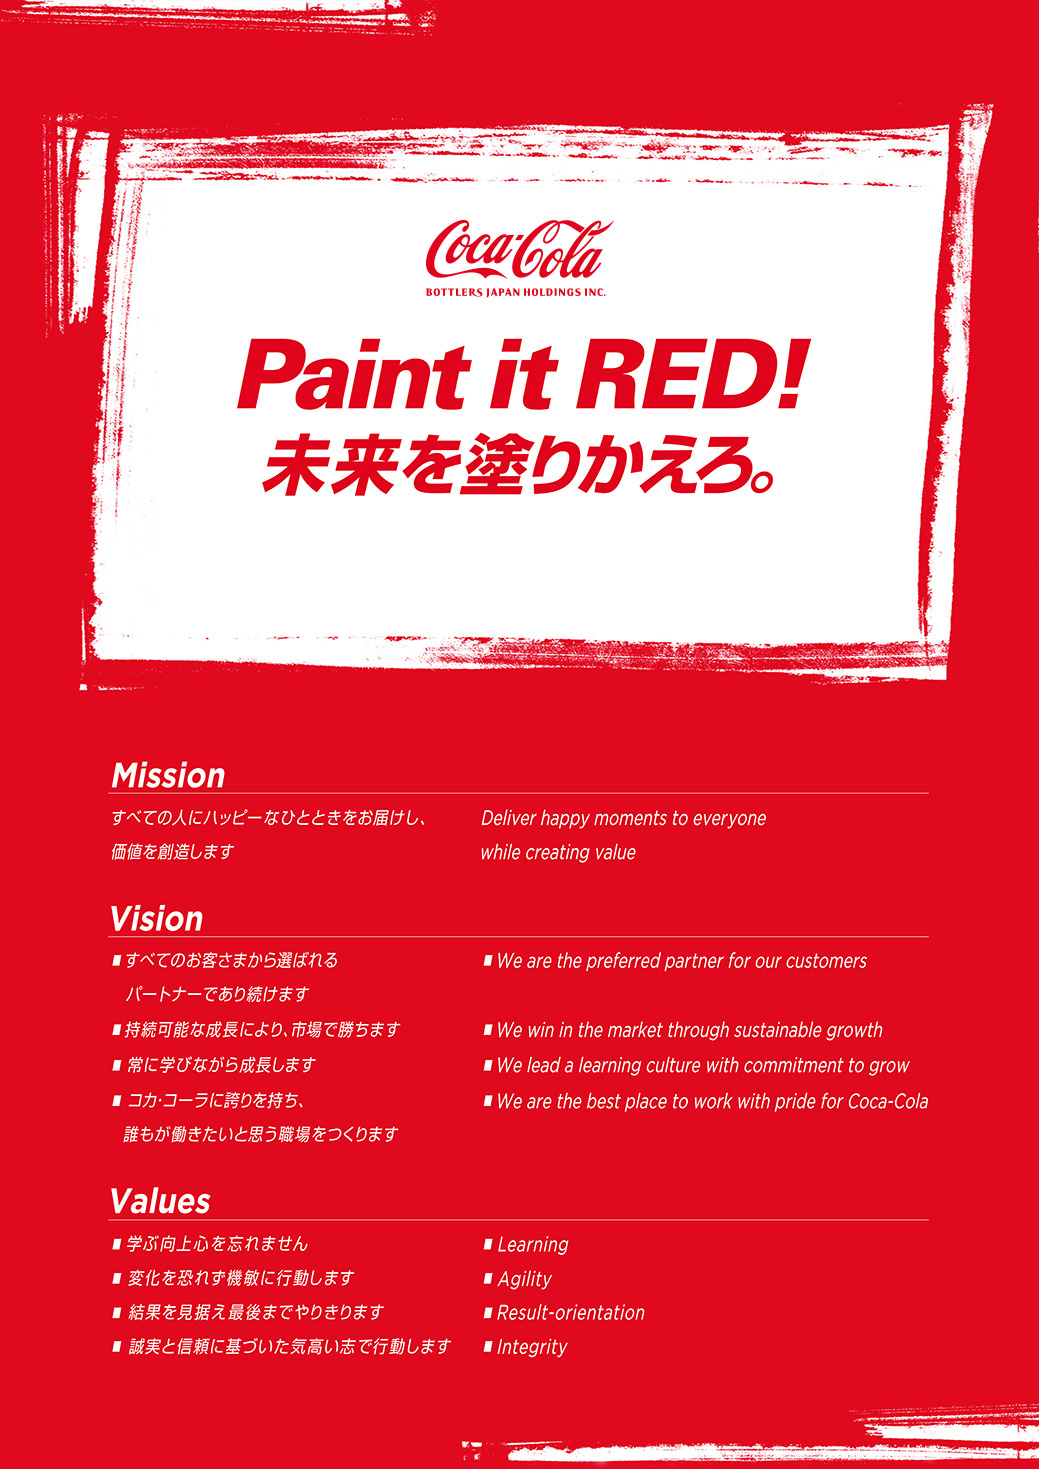 【Paint it RED!】
				MISSON: Deliver happy moments to everyone while creating value.
				VISION: We are preferred partner for our customers. / We win in the marketthrough sustainable growth. / We lead a learning culture with commitment to grow. / We are the best place to work with pride for Coca-Cola.
				VALUES: Learning / Agility / Result-orientation / Integrity